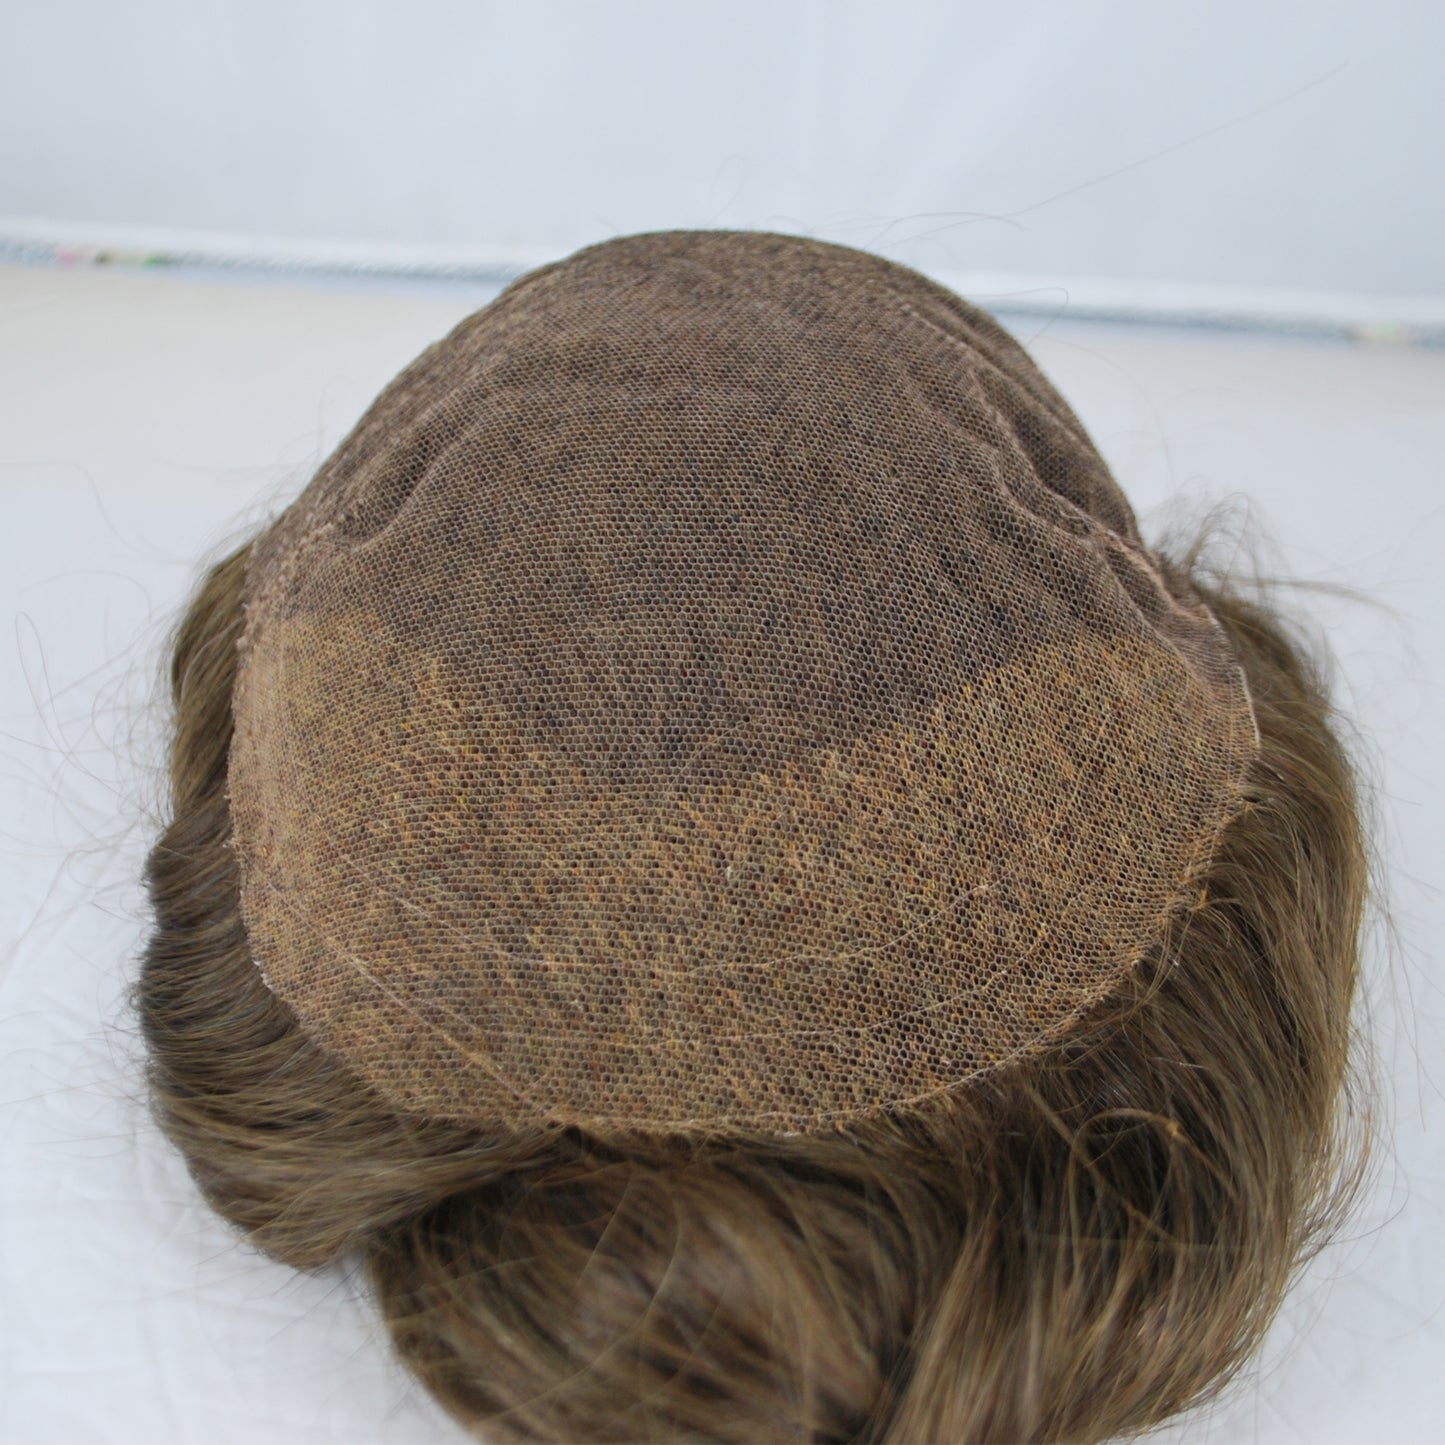 Clearance#4 medium brown toupee for old man 9.5x6.5" French lace  men's hair piece